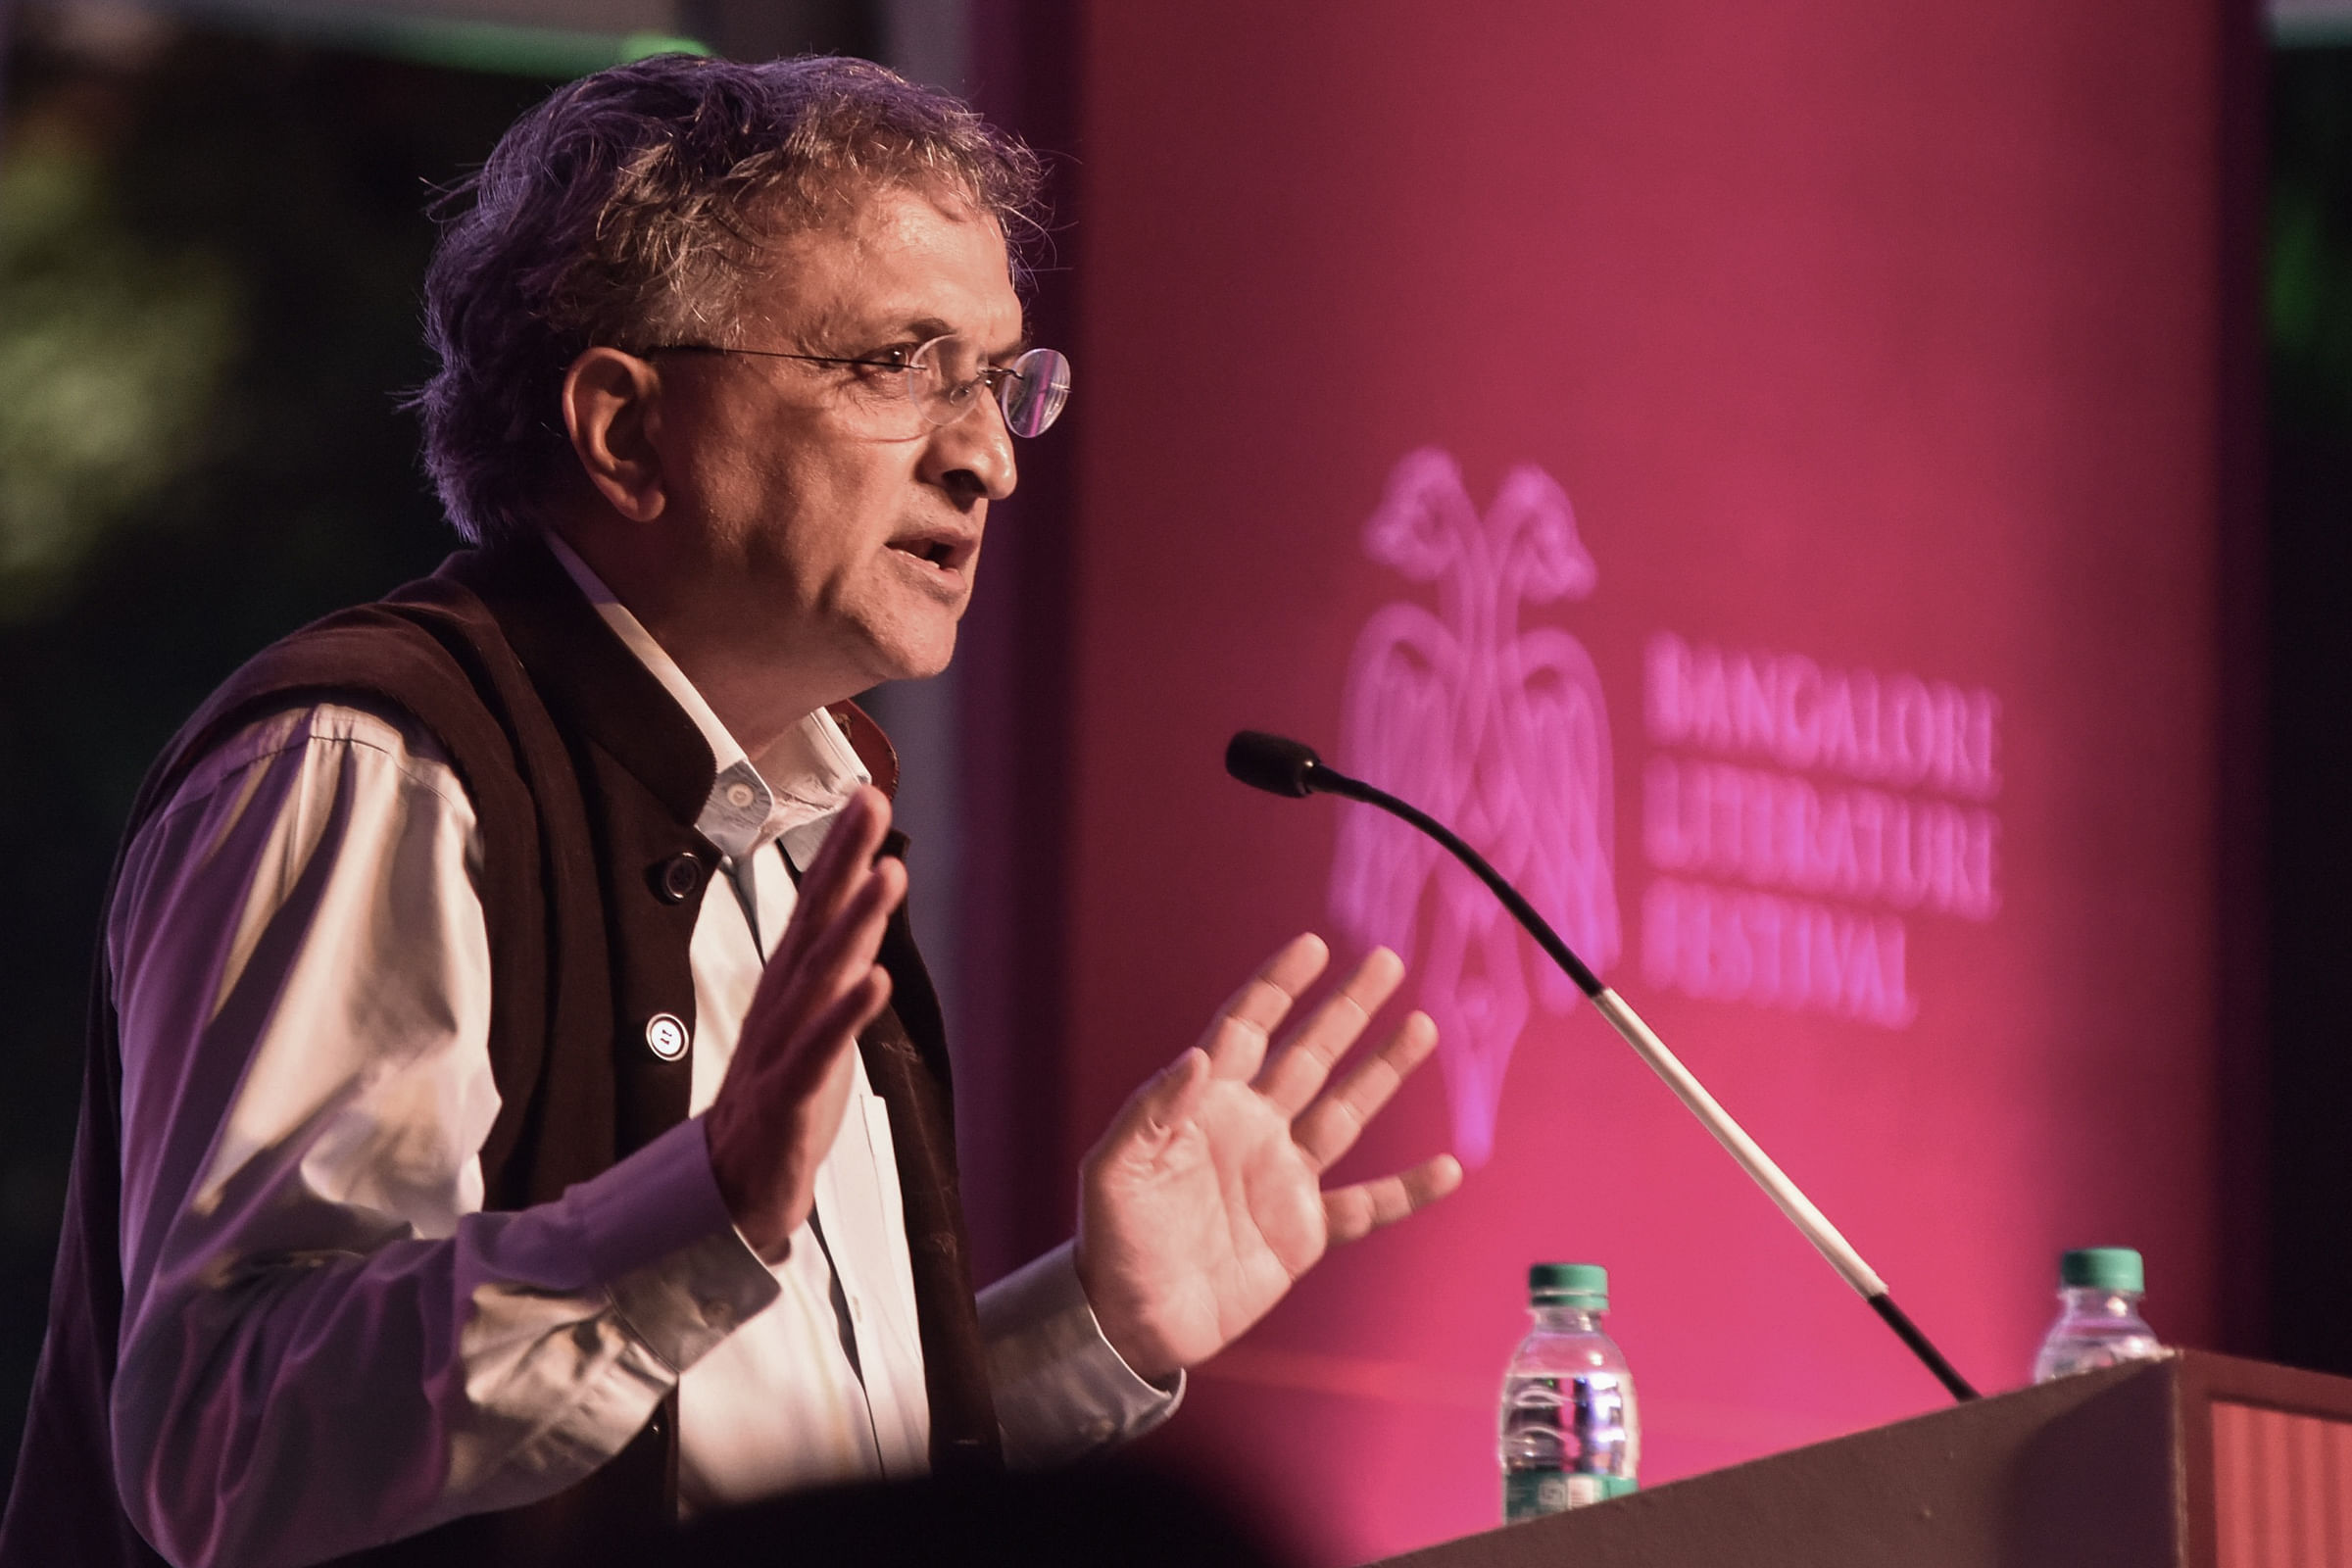 Ramachandra Guha spoke on ‘Is There an Indian Road to Equality?